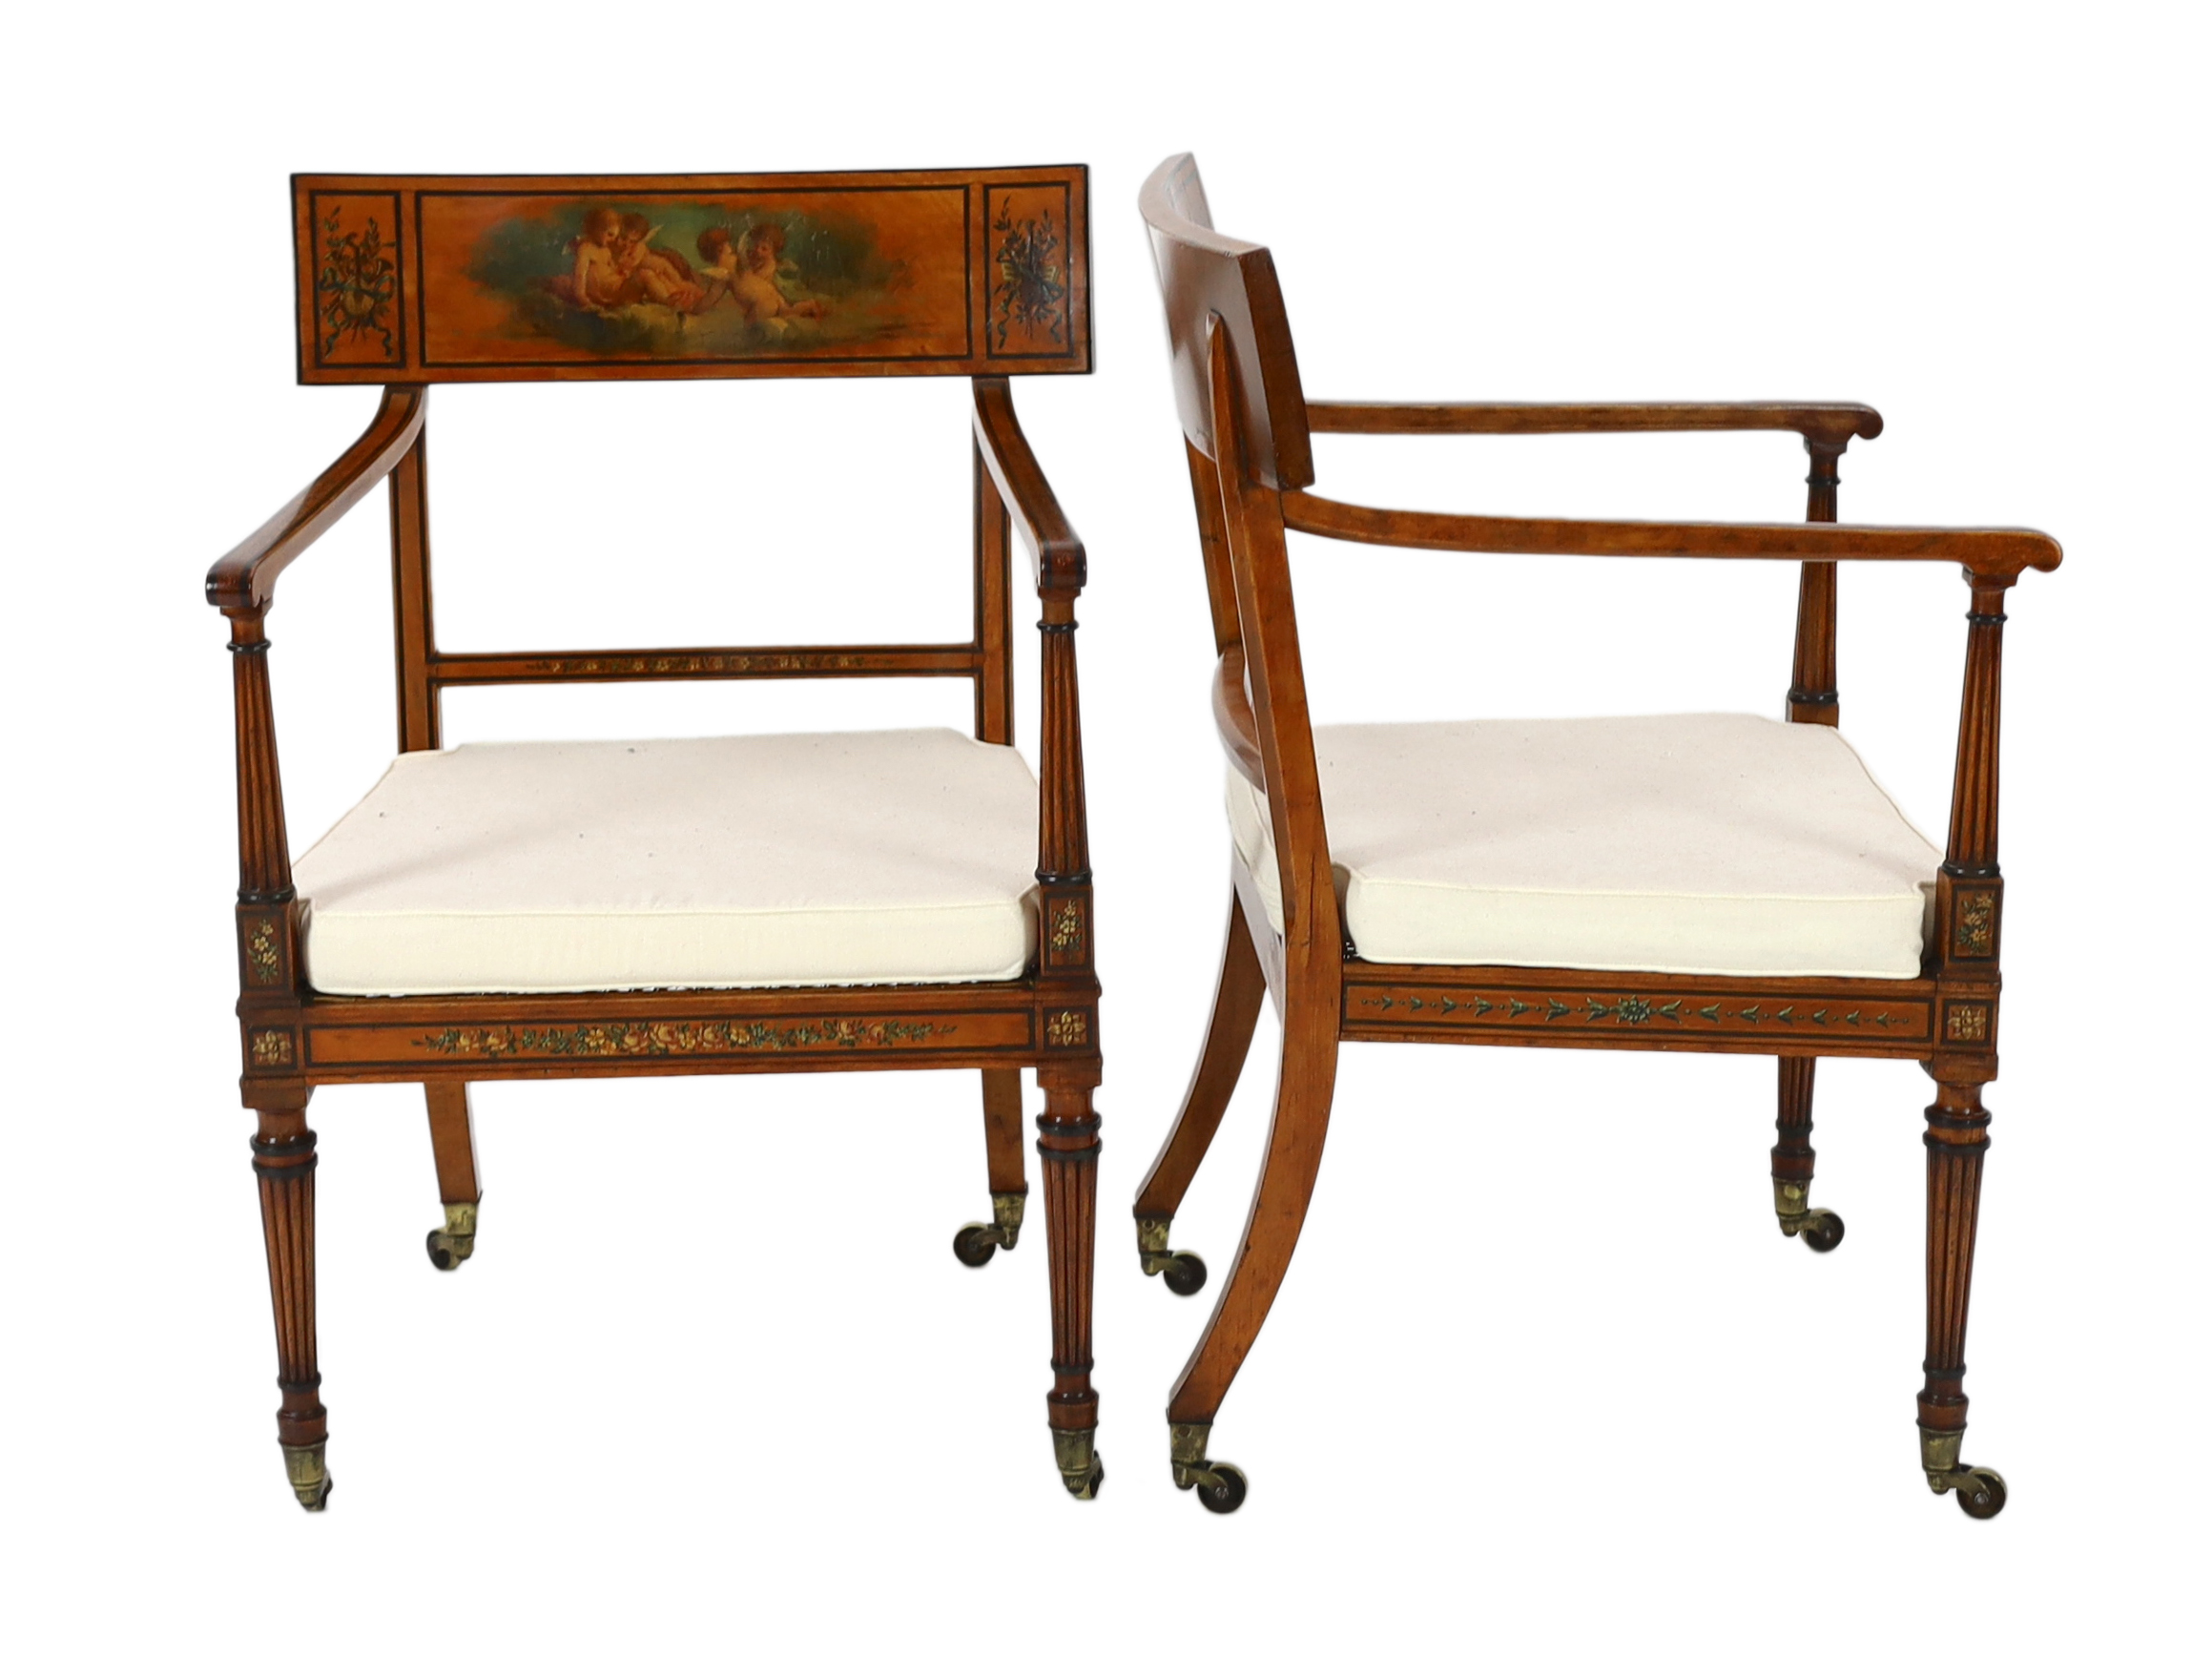 A pair of Edwardian Sheraton revival painted satinwood elbow chairs, decorated with cherubs, flowers